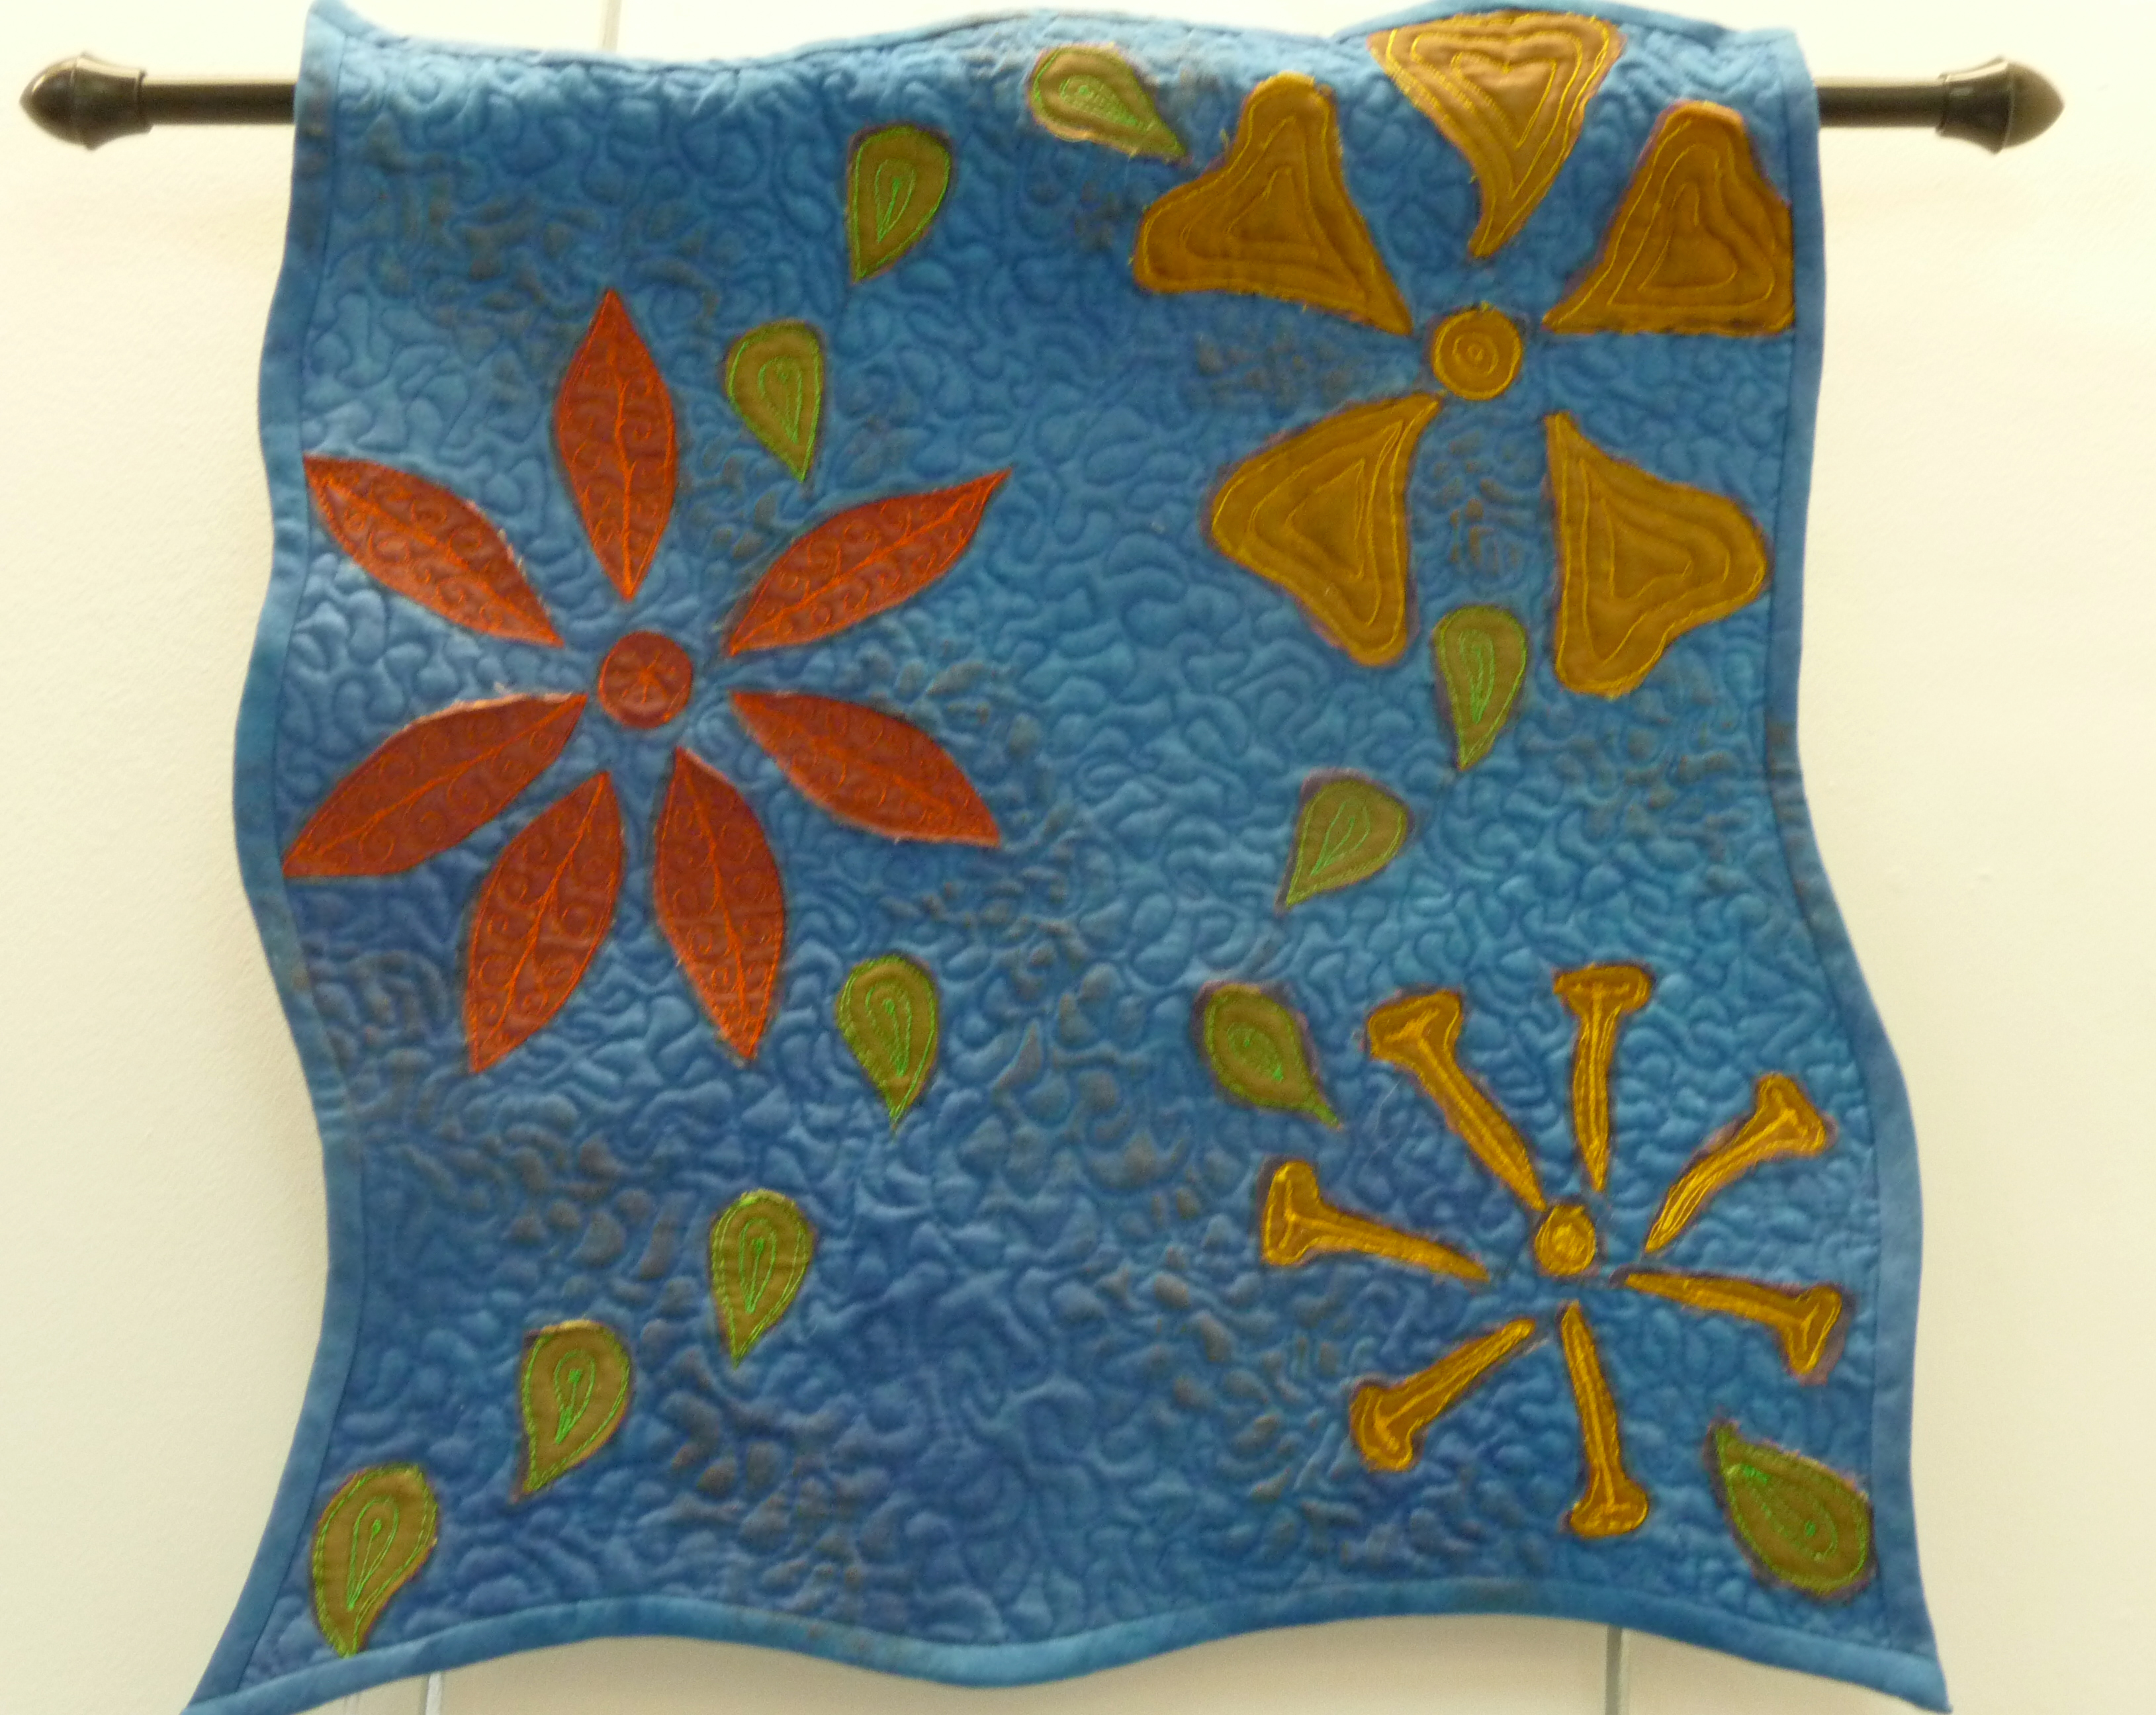 FLORA by Tracey Ramsey, quilted wall hanging